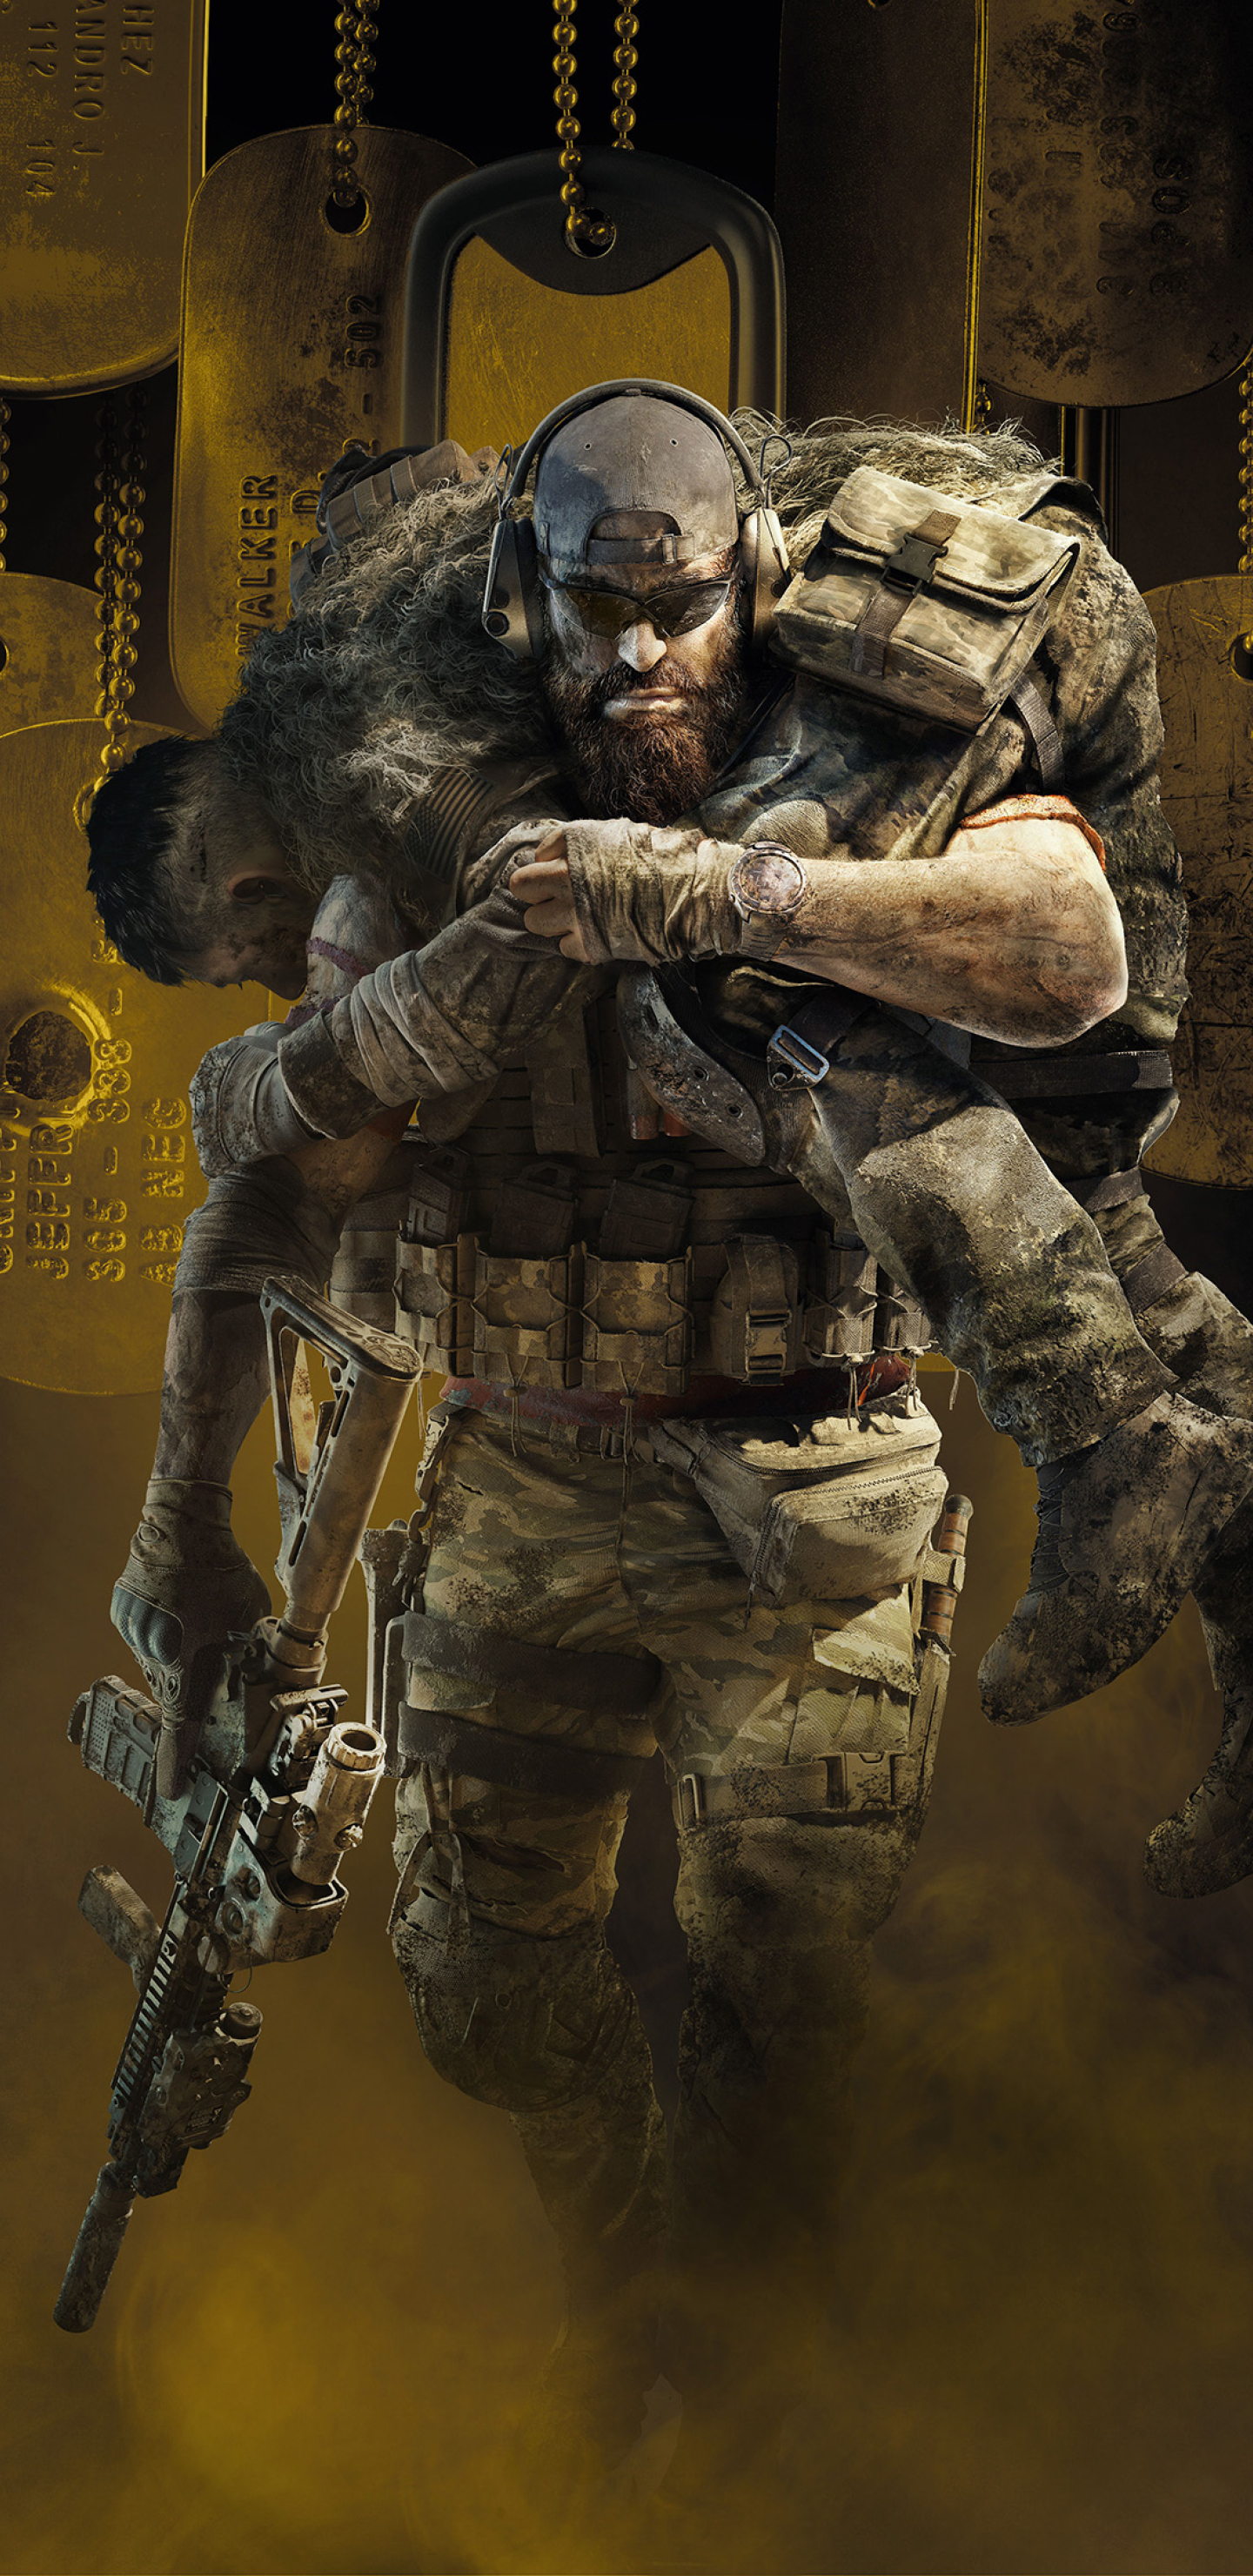 1440x2960 4K Ghost Recon Breakpoint Poster Samsung Galaxy Note 9,8, S9